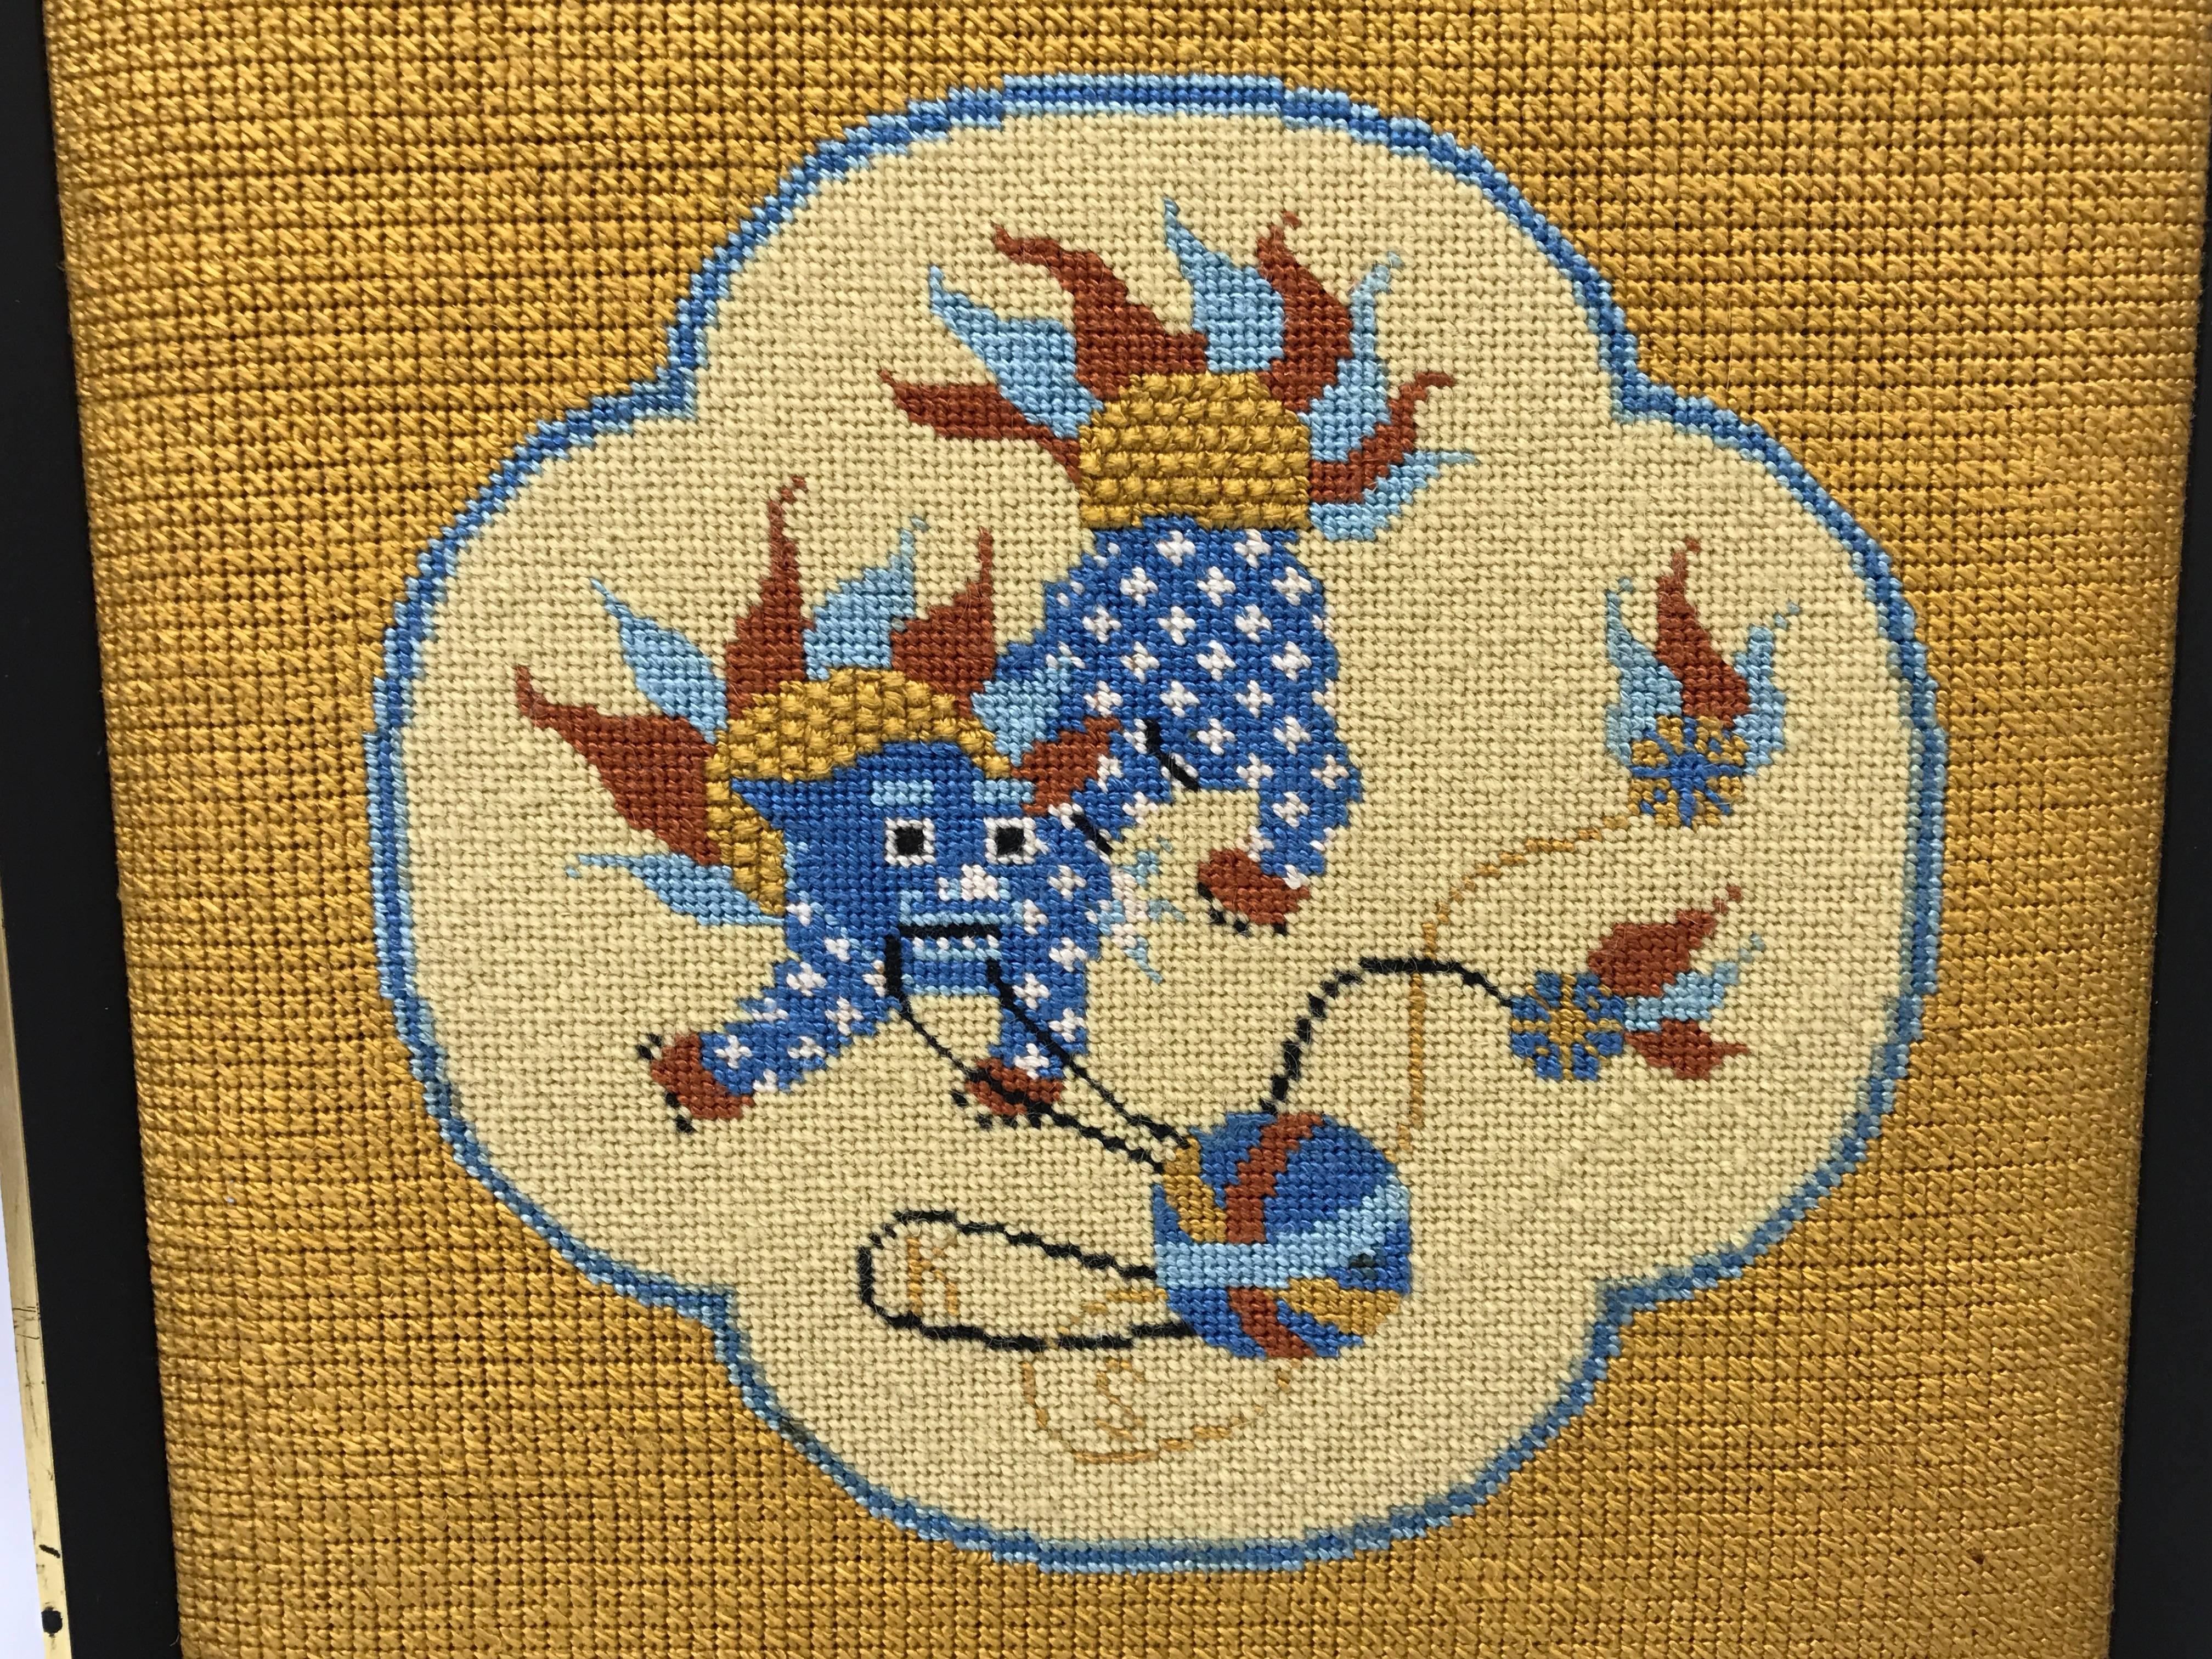 Offered is a stunning, 1960s framed needlepoint of a playful foo dog. Could easily be taken out of the frame and turned into a pillow. 